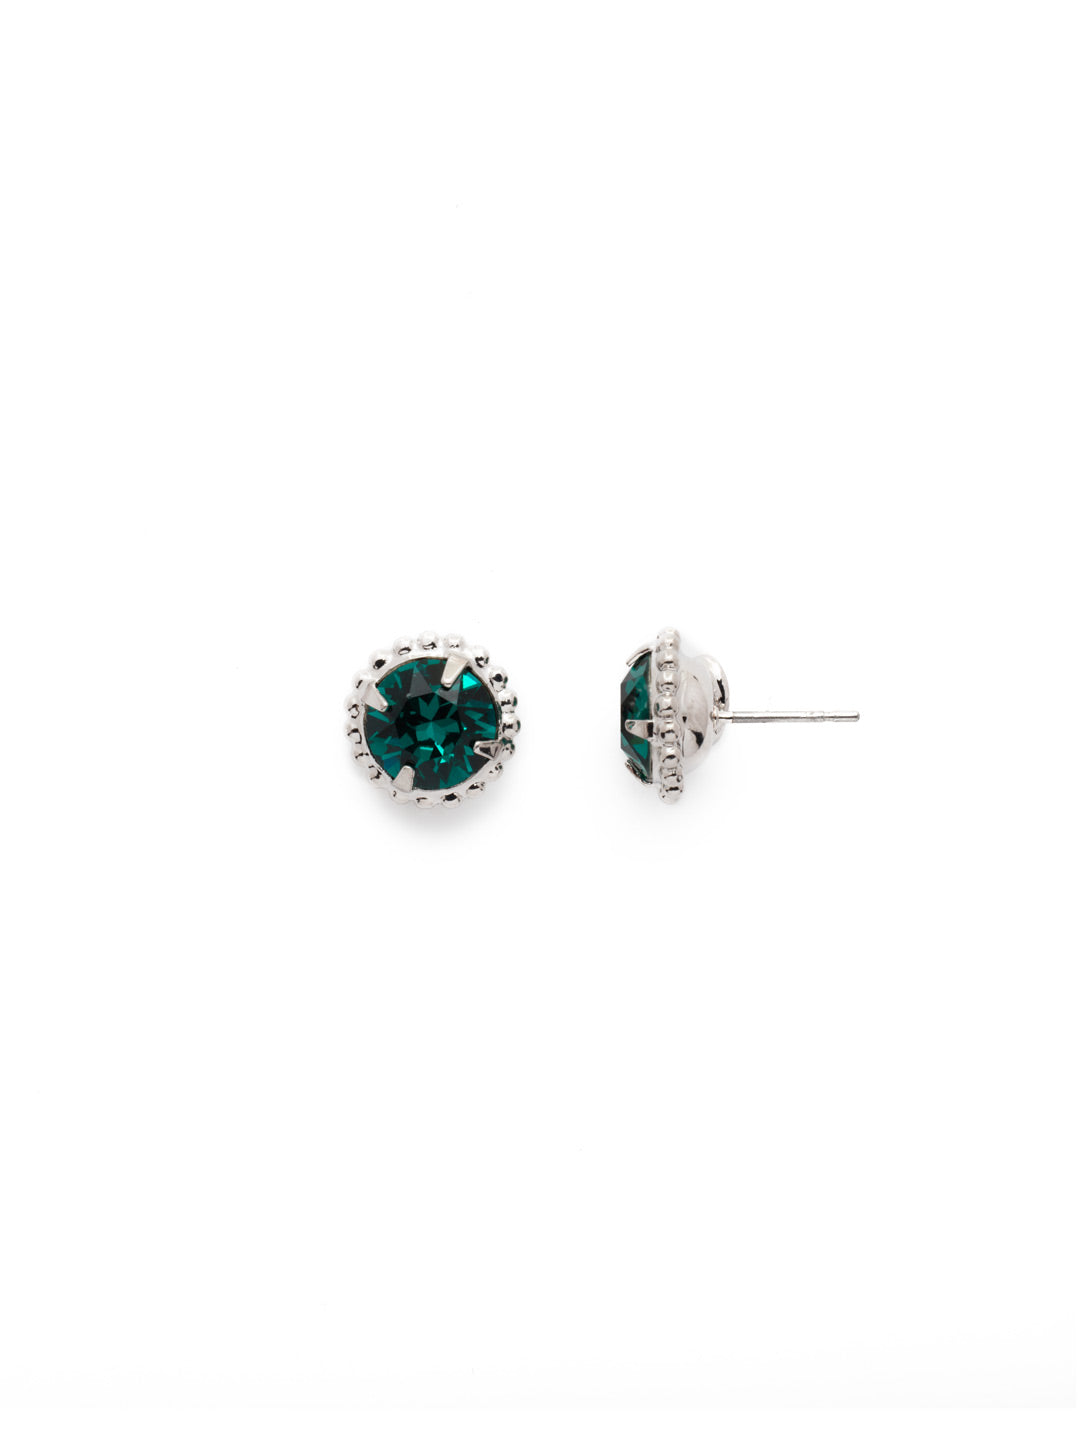 Simplicity Stud Earrings - EBY38RHEME - <p>A timeless classic, the Simplicity Stud Earrings feature round cut crystals in a variety of colors; accented with a halo of metal beaded detail. Need help picking a stud? <a href="https://www.sorrelli.com/blogs/sisterhood/round-stud-earrings-101-a-rundown-of-sizes-styles-and-sparkle">Check out our size guide!</a> From Sorrelli's Emerald collection in our Palladium Silver-tone finish.</p>